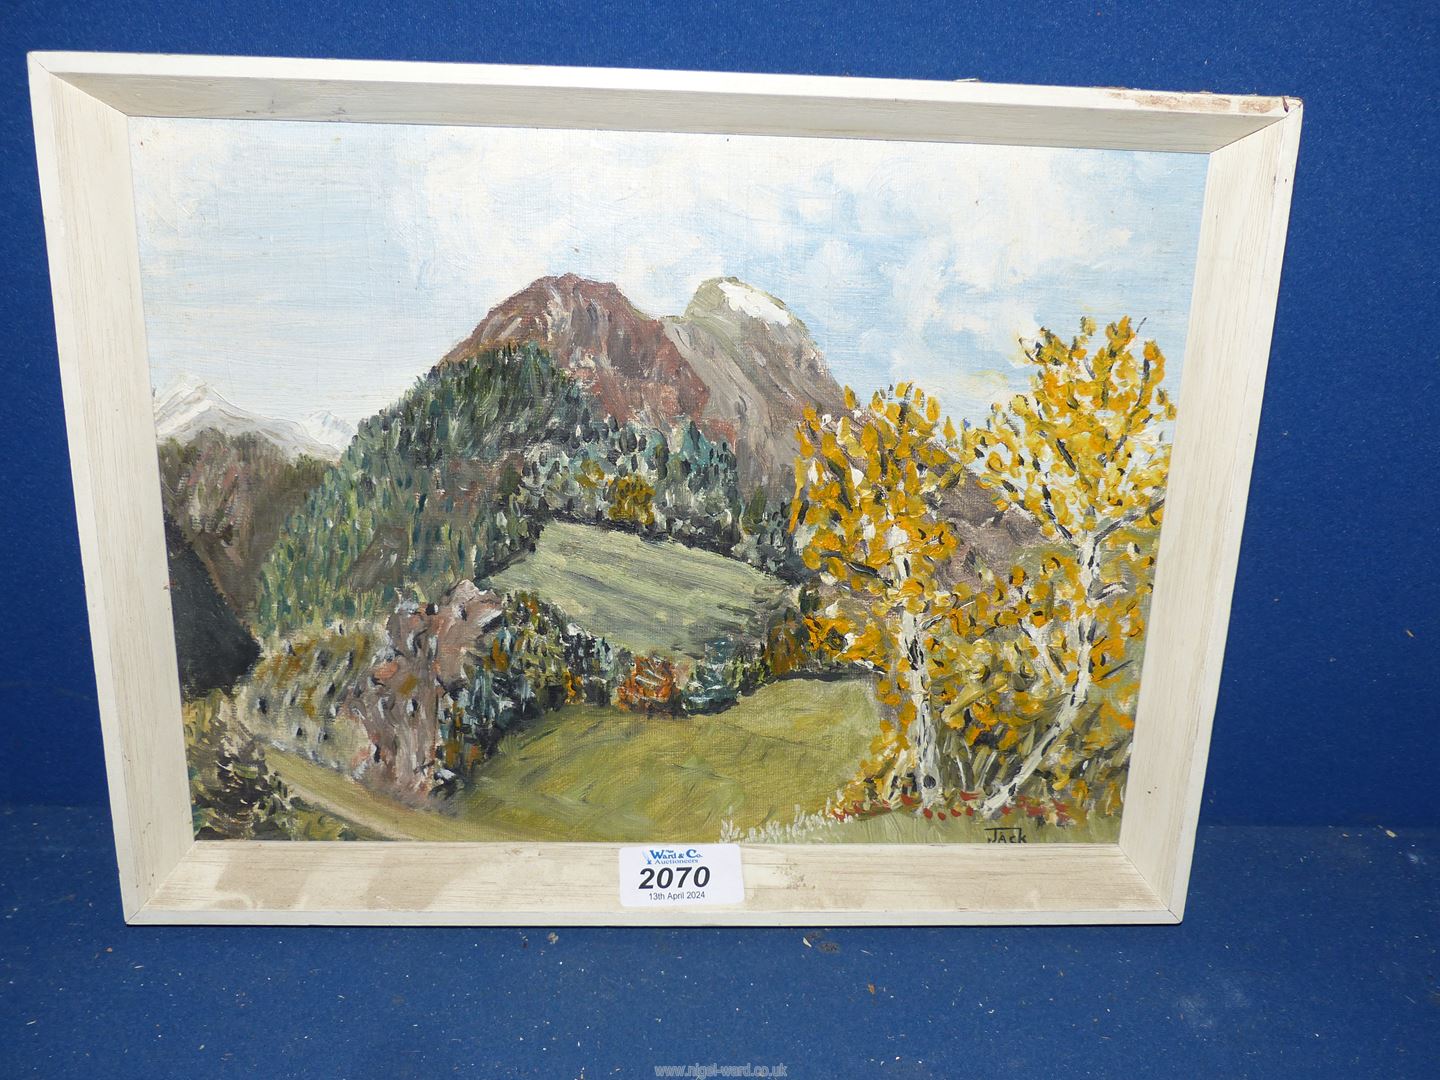 A small Oil on board of a Mountain landscape signed lower right Jack. 12 3/4" x 28 1/2".